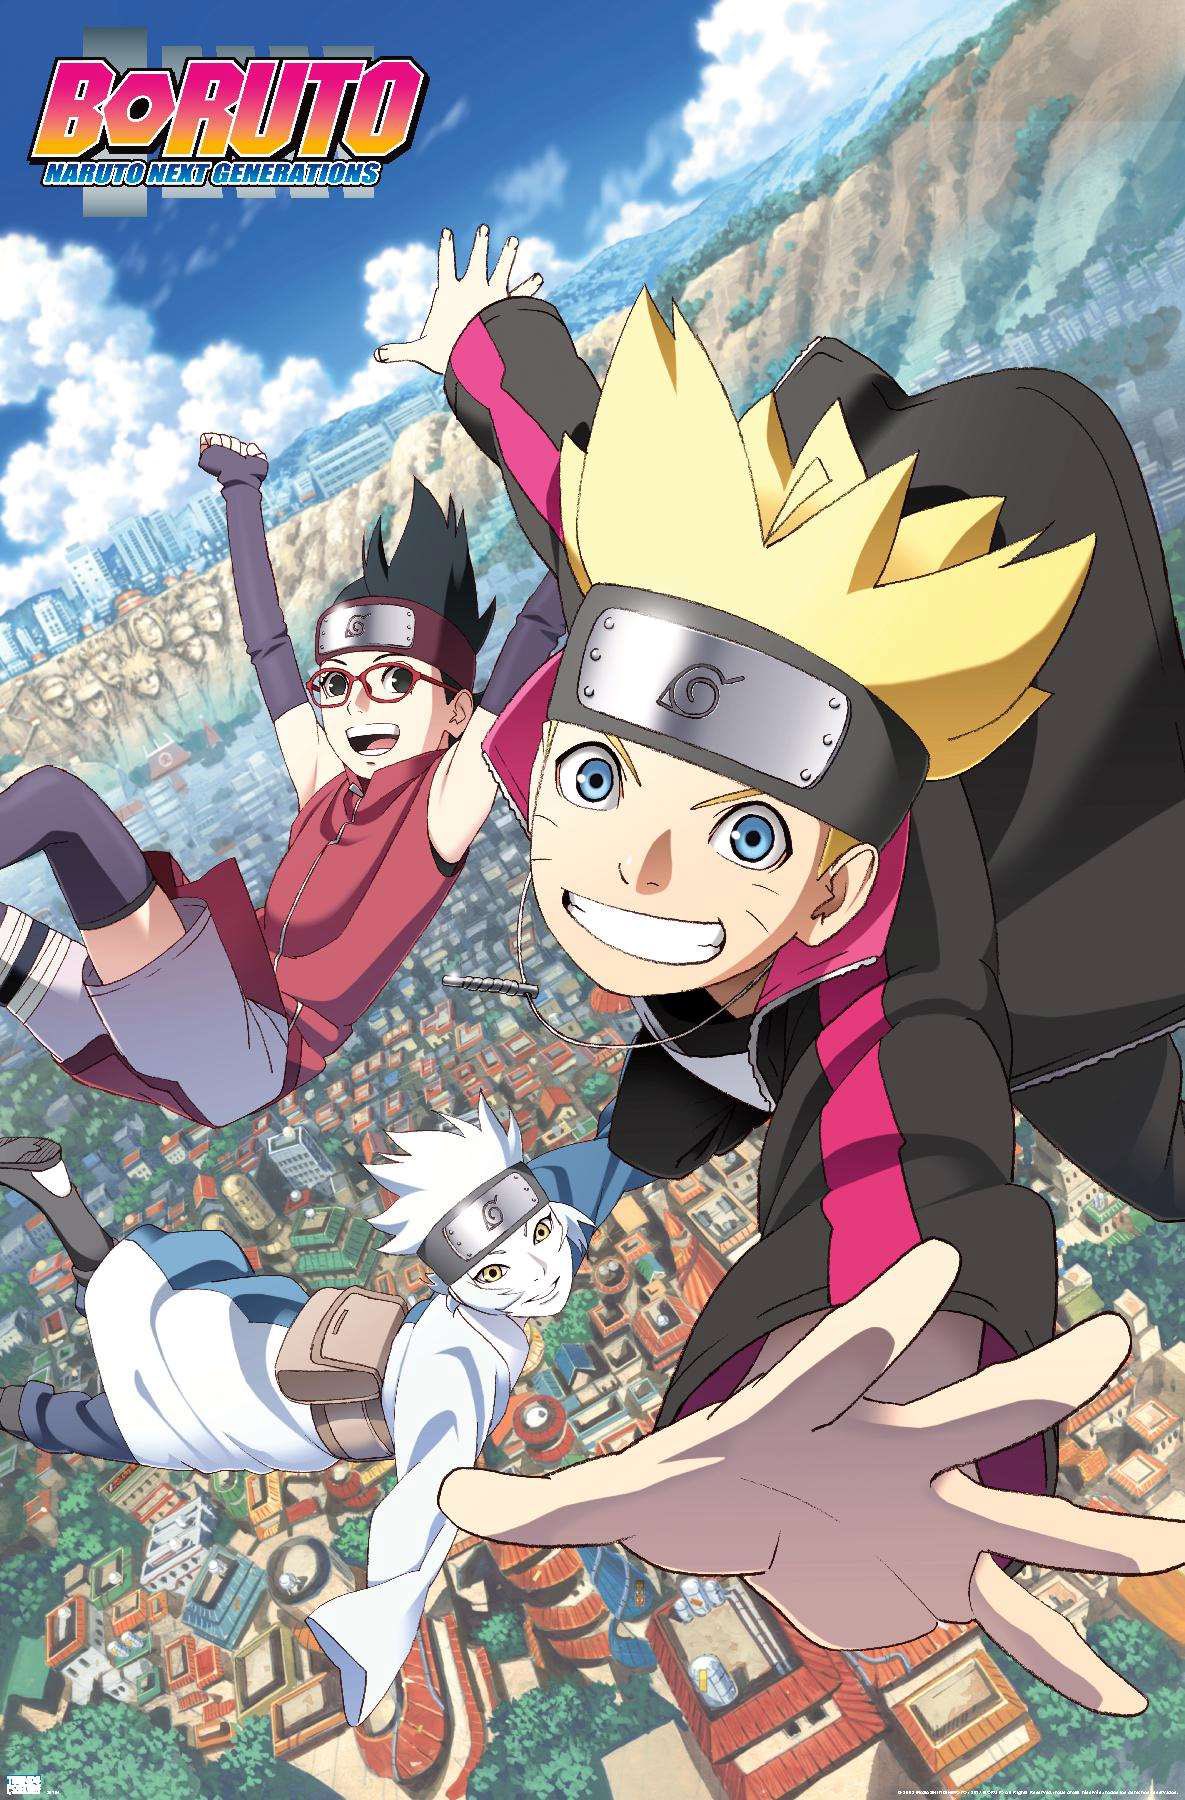 Goldy-RiSA 🌺🧣 on X: Source: The BORUTO anime will go on hiatus after  March and be replaced with the return of Black Clover in April 2023!!!   / X